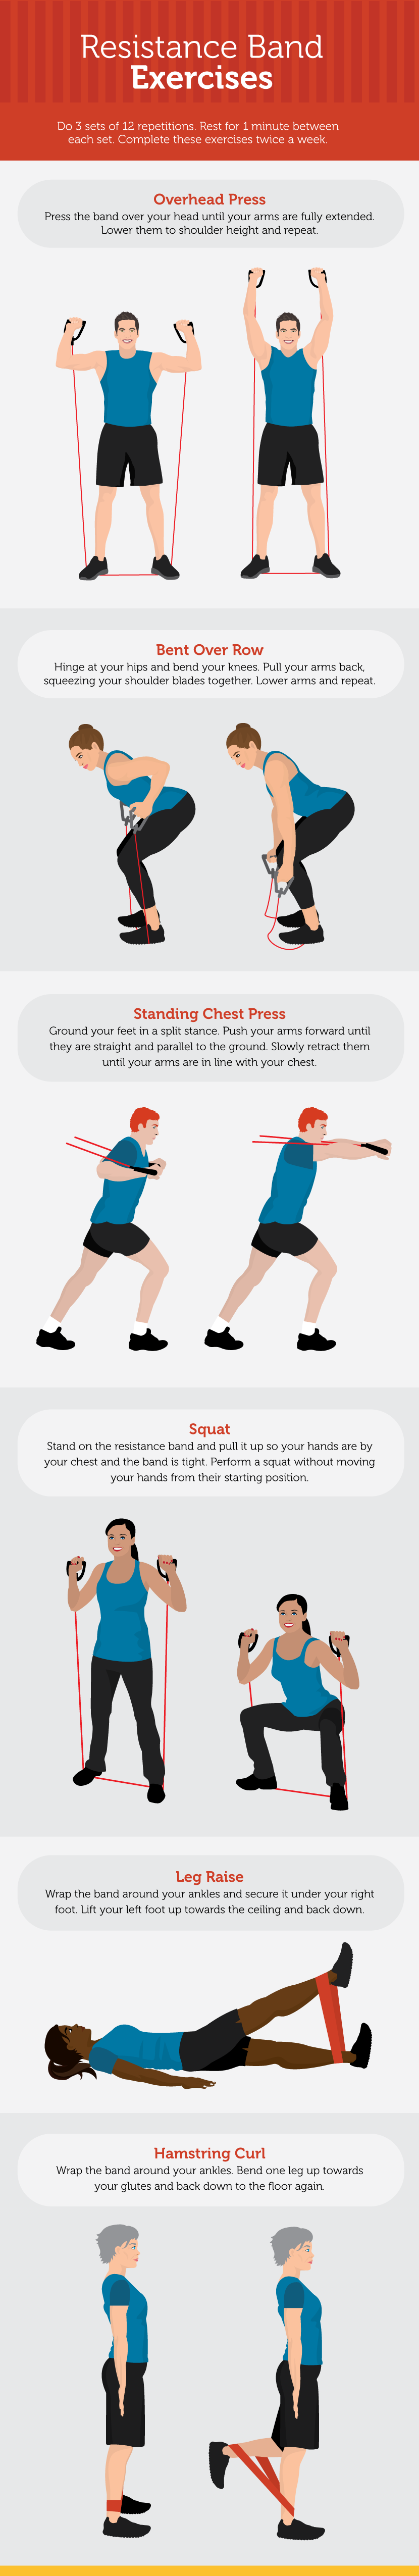 How to Use Resistance Bands for Exercise